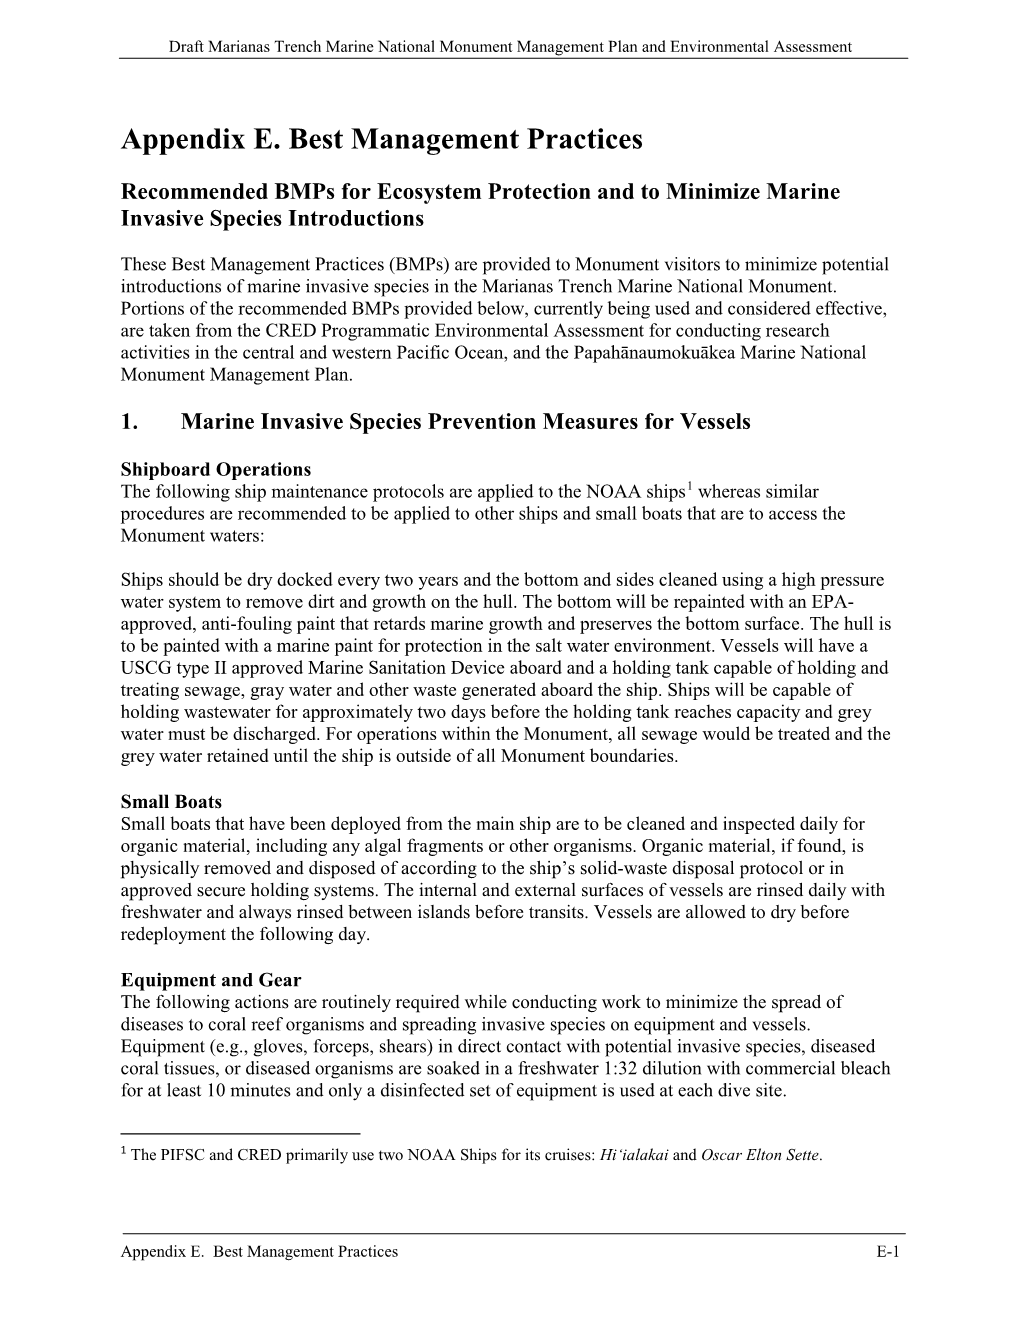 Draft Marianas Trench Marine National Monument Management Plan and Environmental Assessment